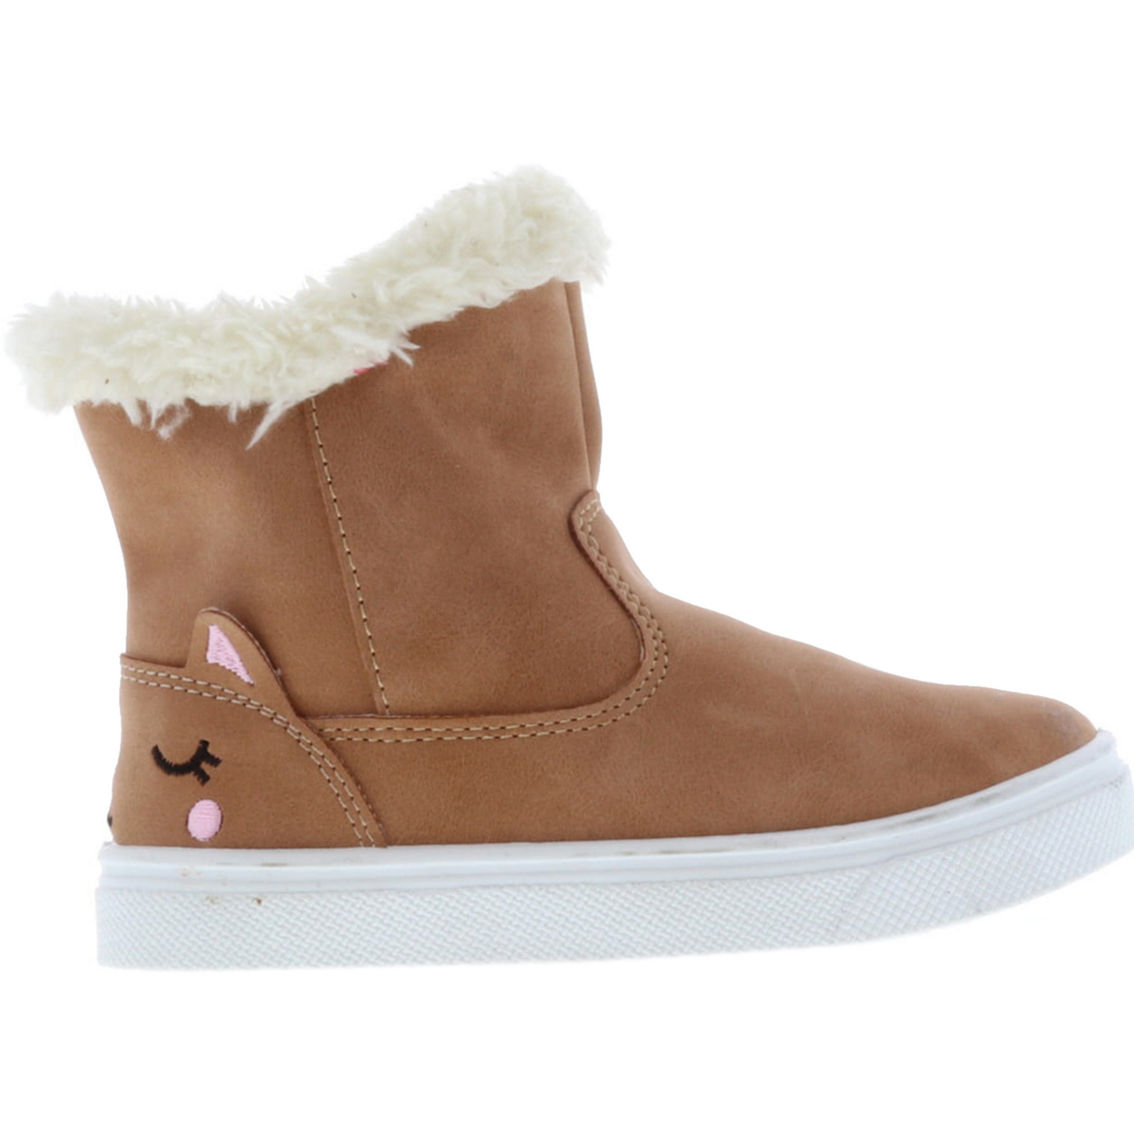 Oomphies Toddler Girls Chilly Boots - Image 3 of 4